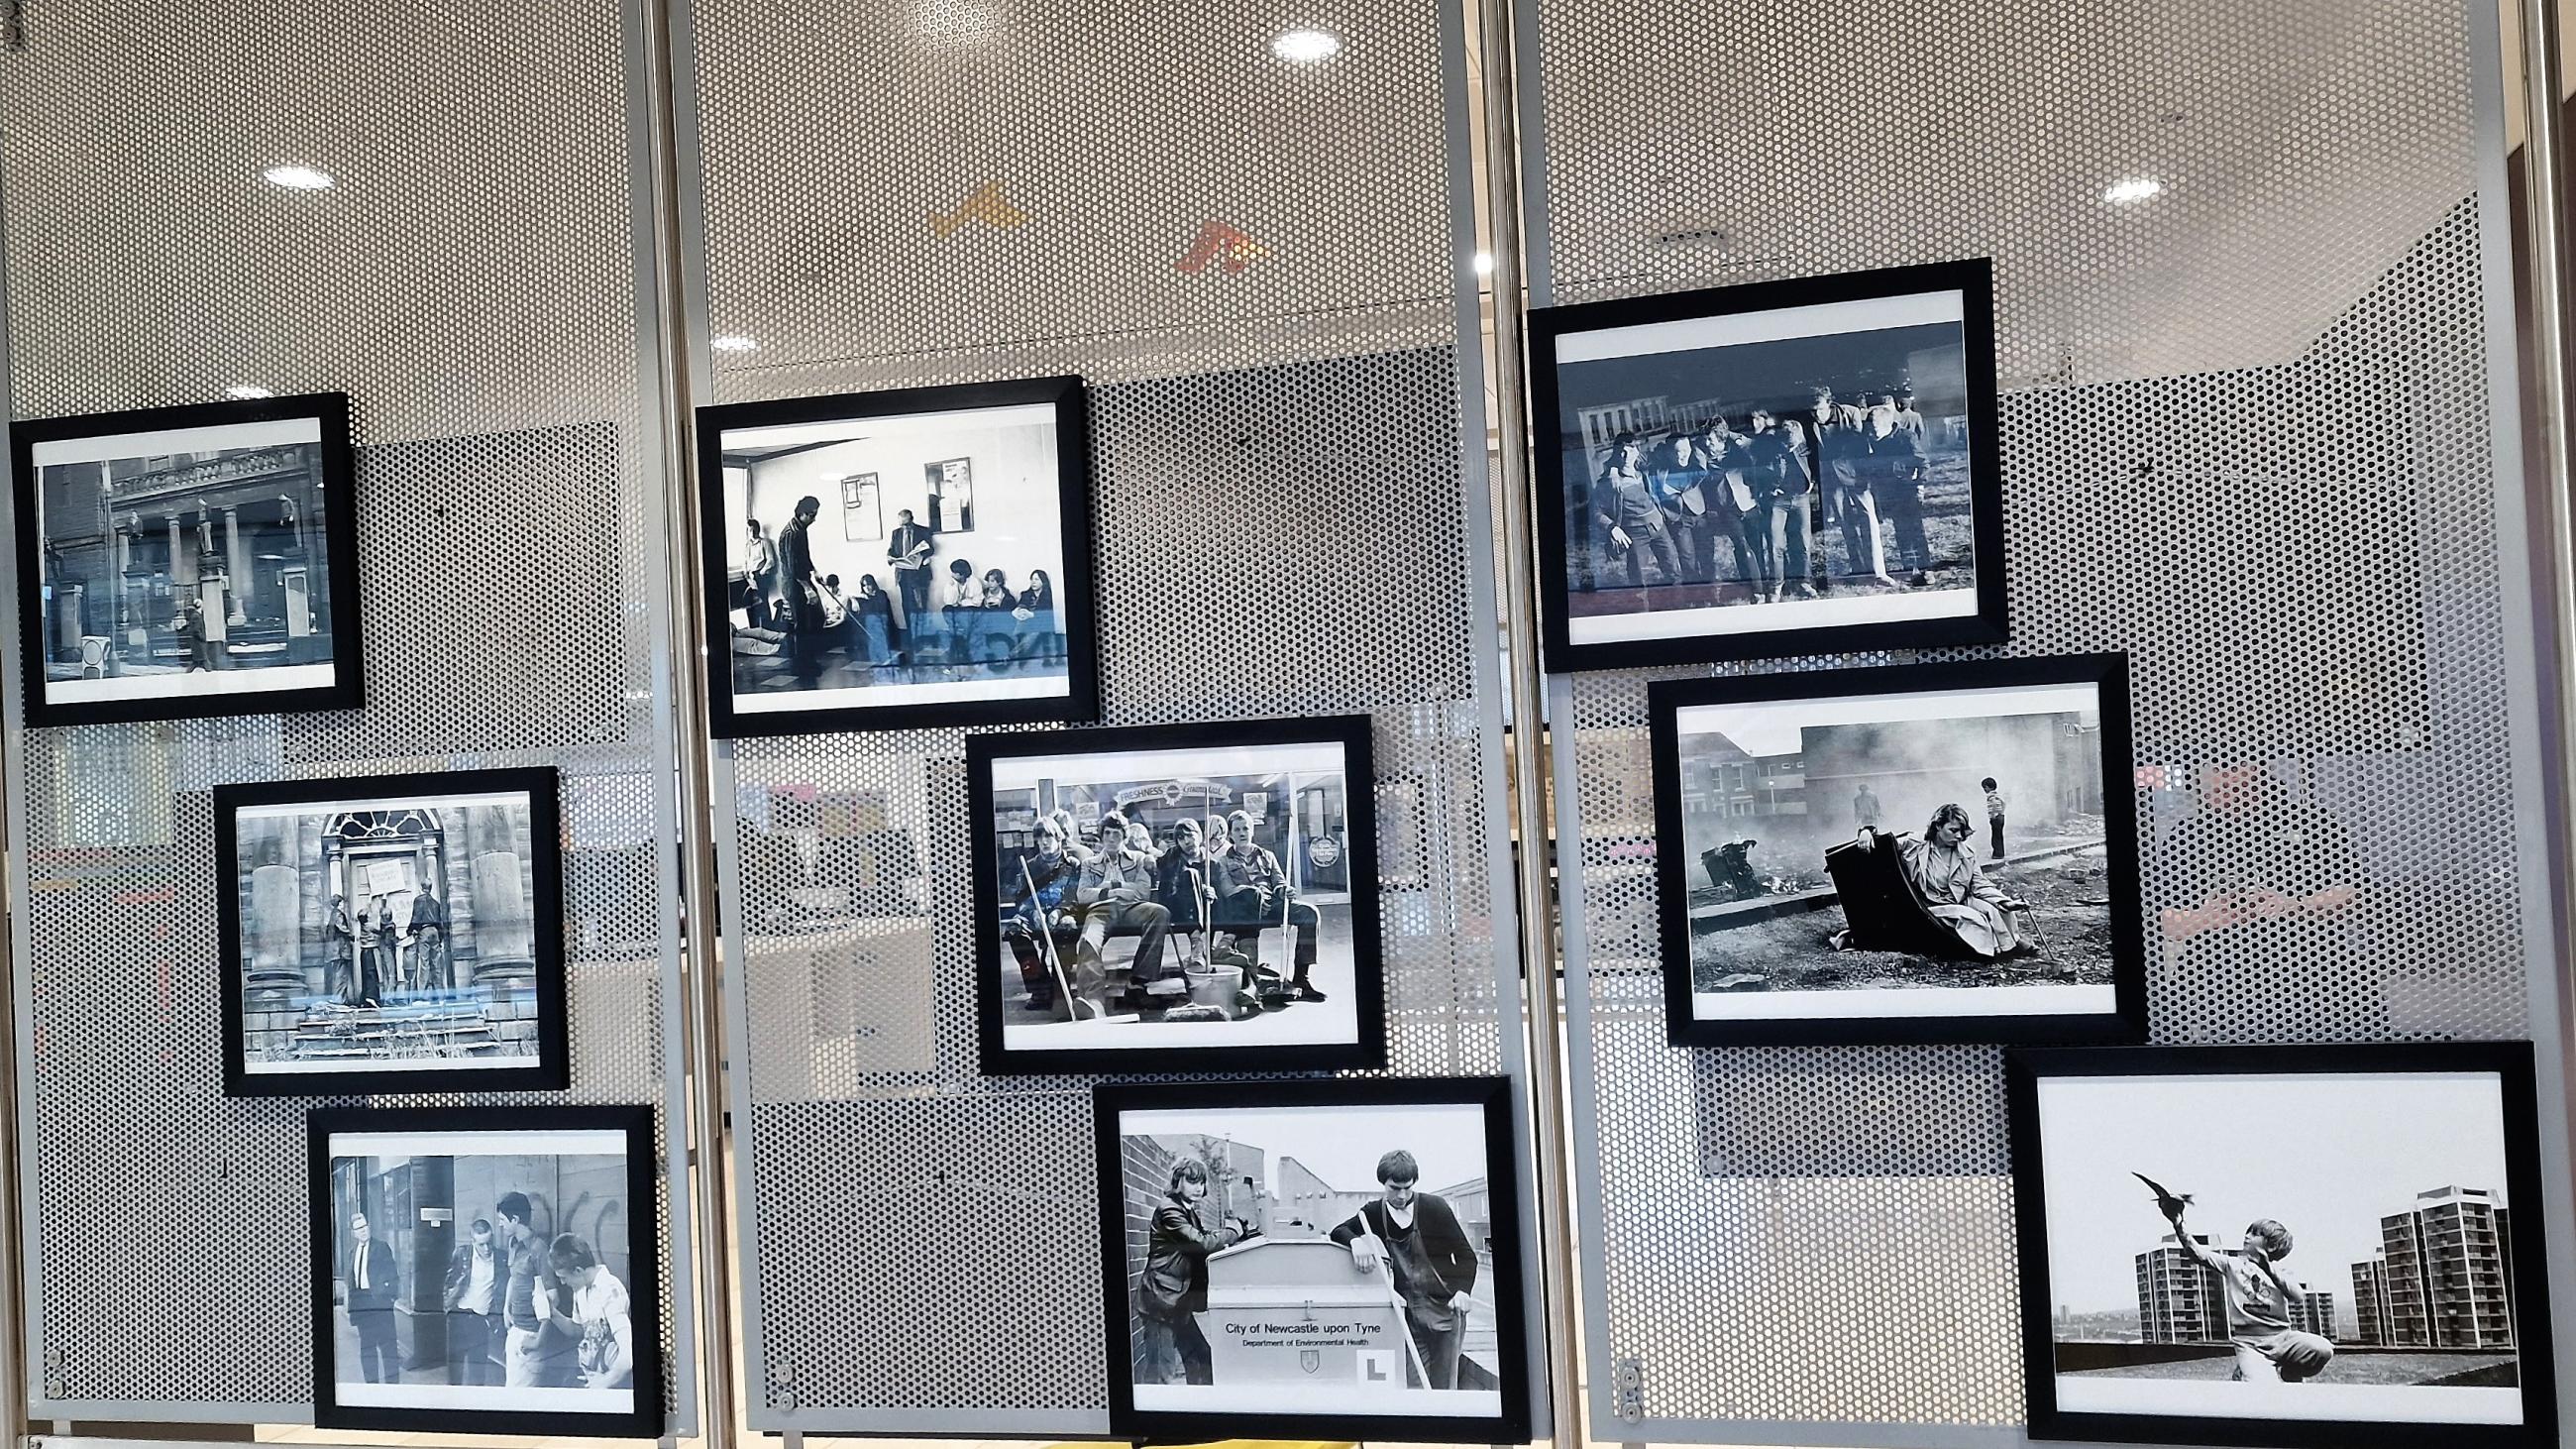 Exhibition stands at Newcastle City Library displaying some of Tish Murtha's photographs